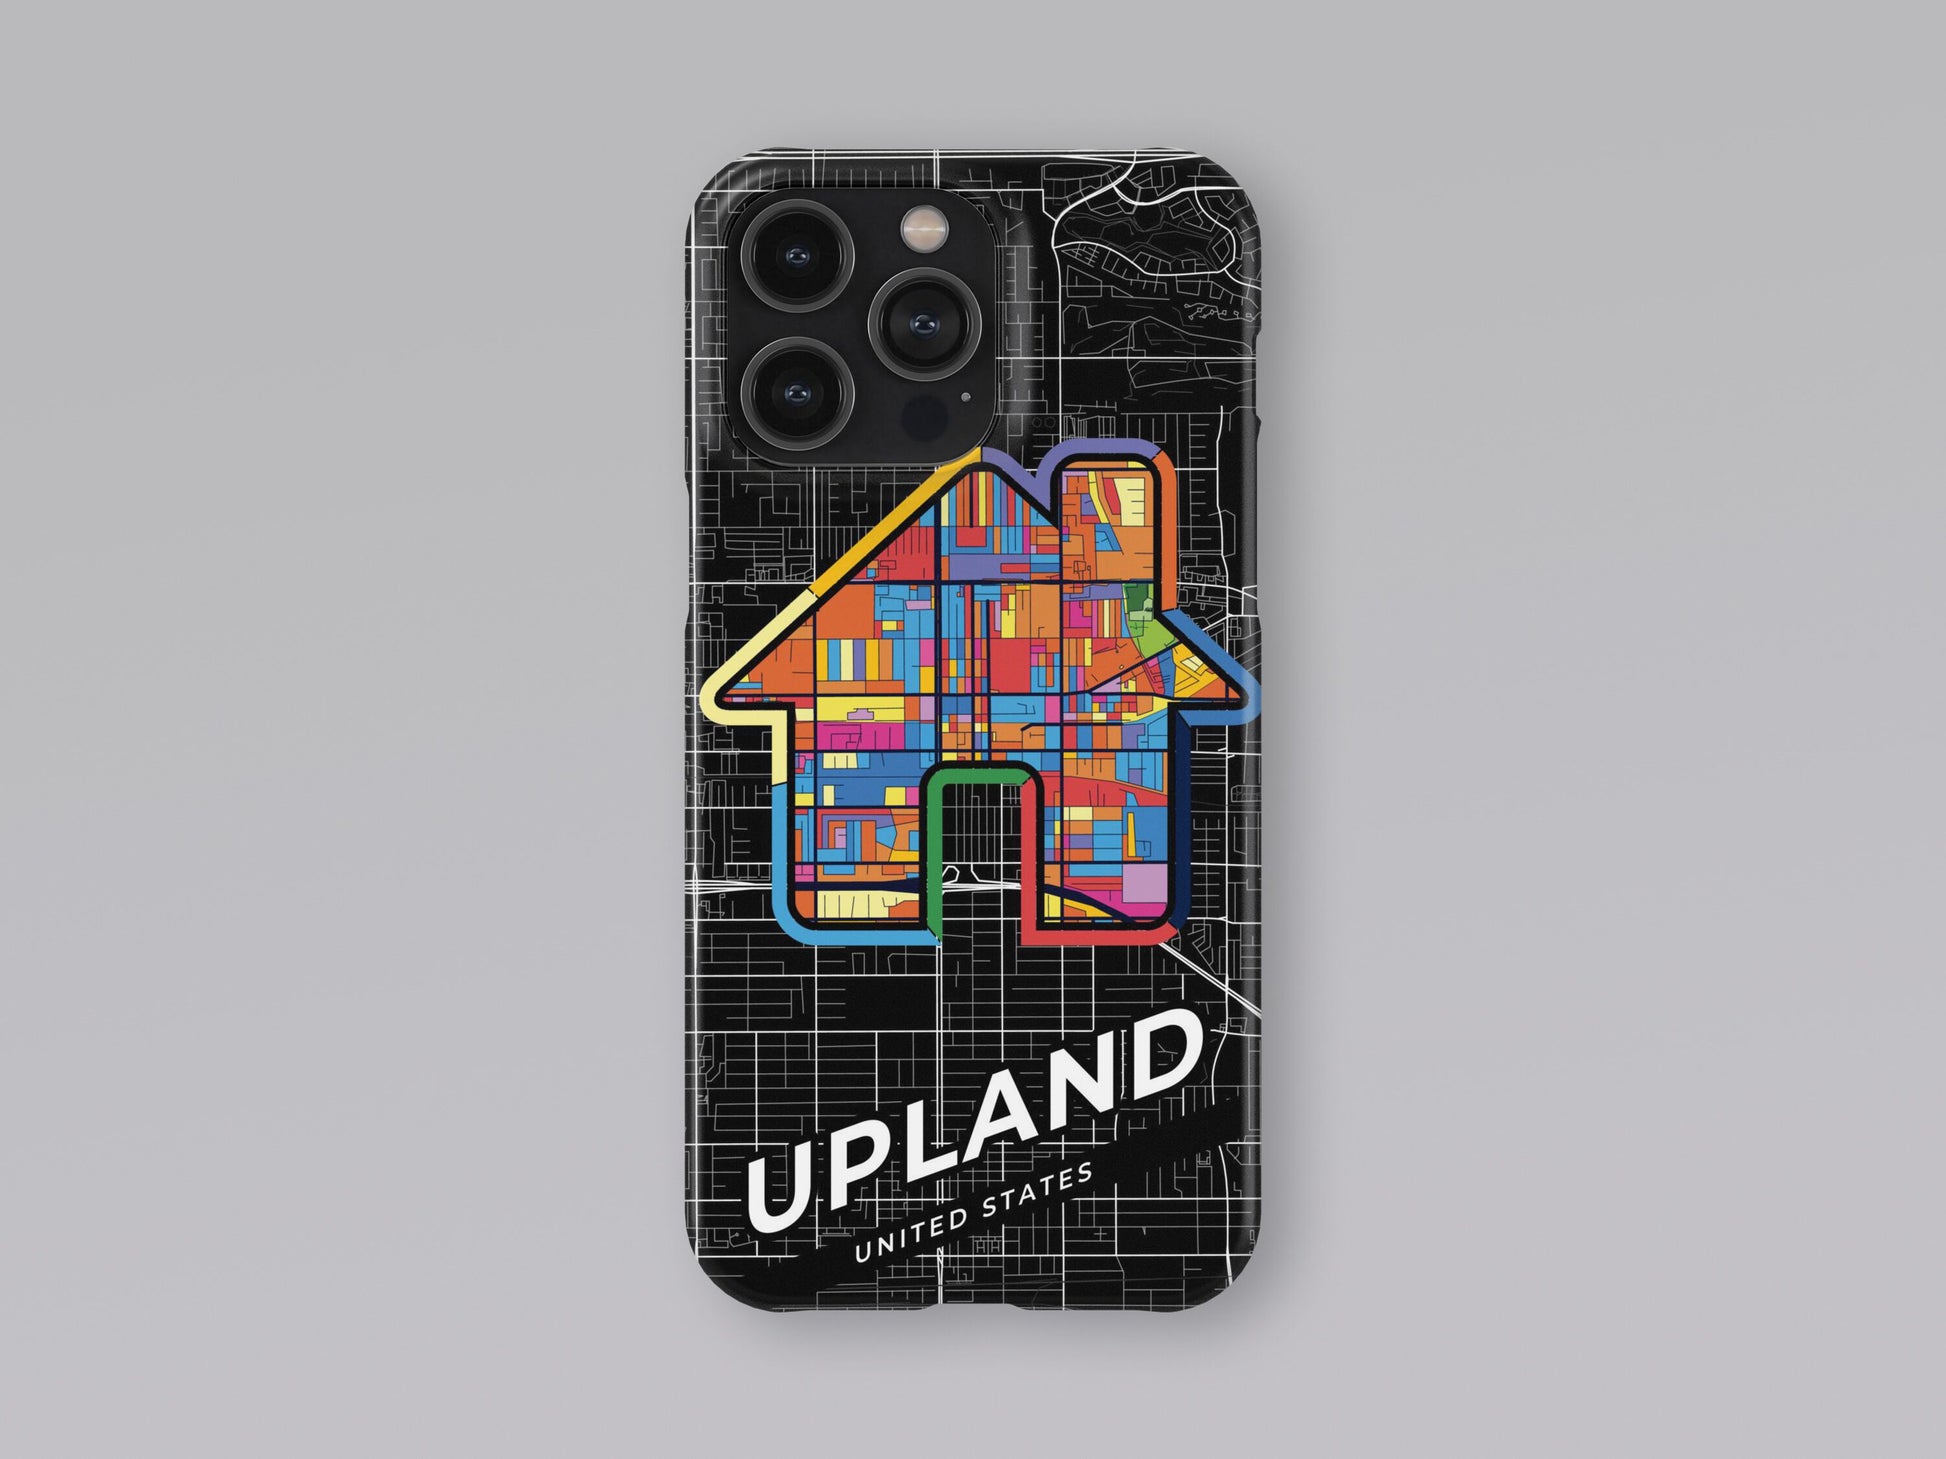 Upland California slim phone case with colorful icon 3